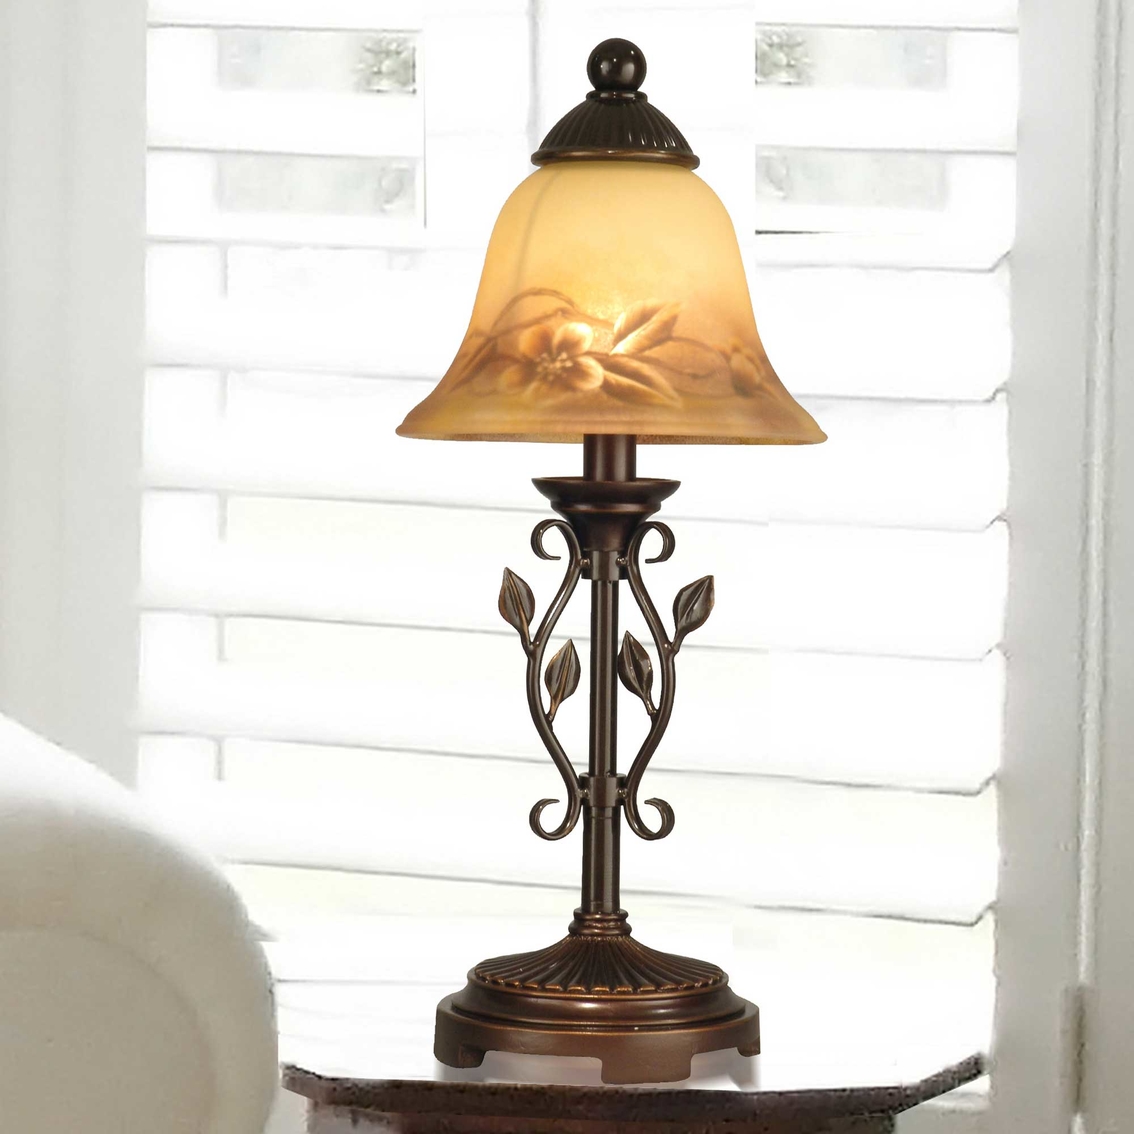 Dale Tiffany Vine Leaf Hand Painted 16.75 in. Accent Lamp - Image 2 of 2